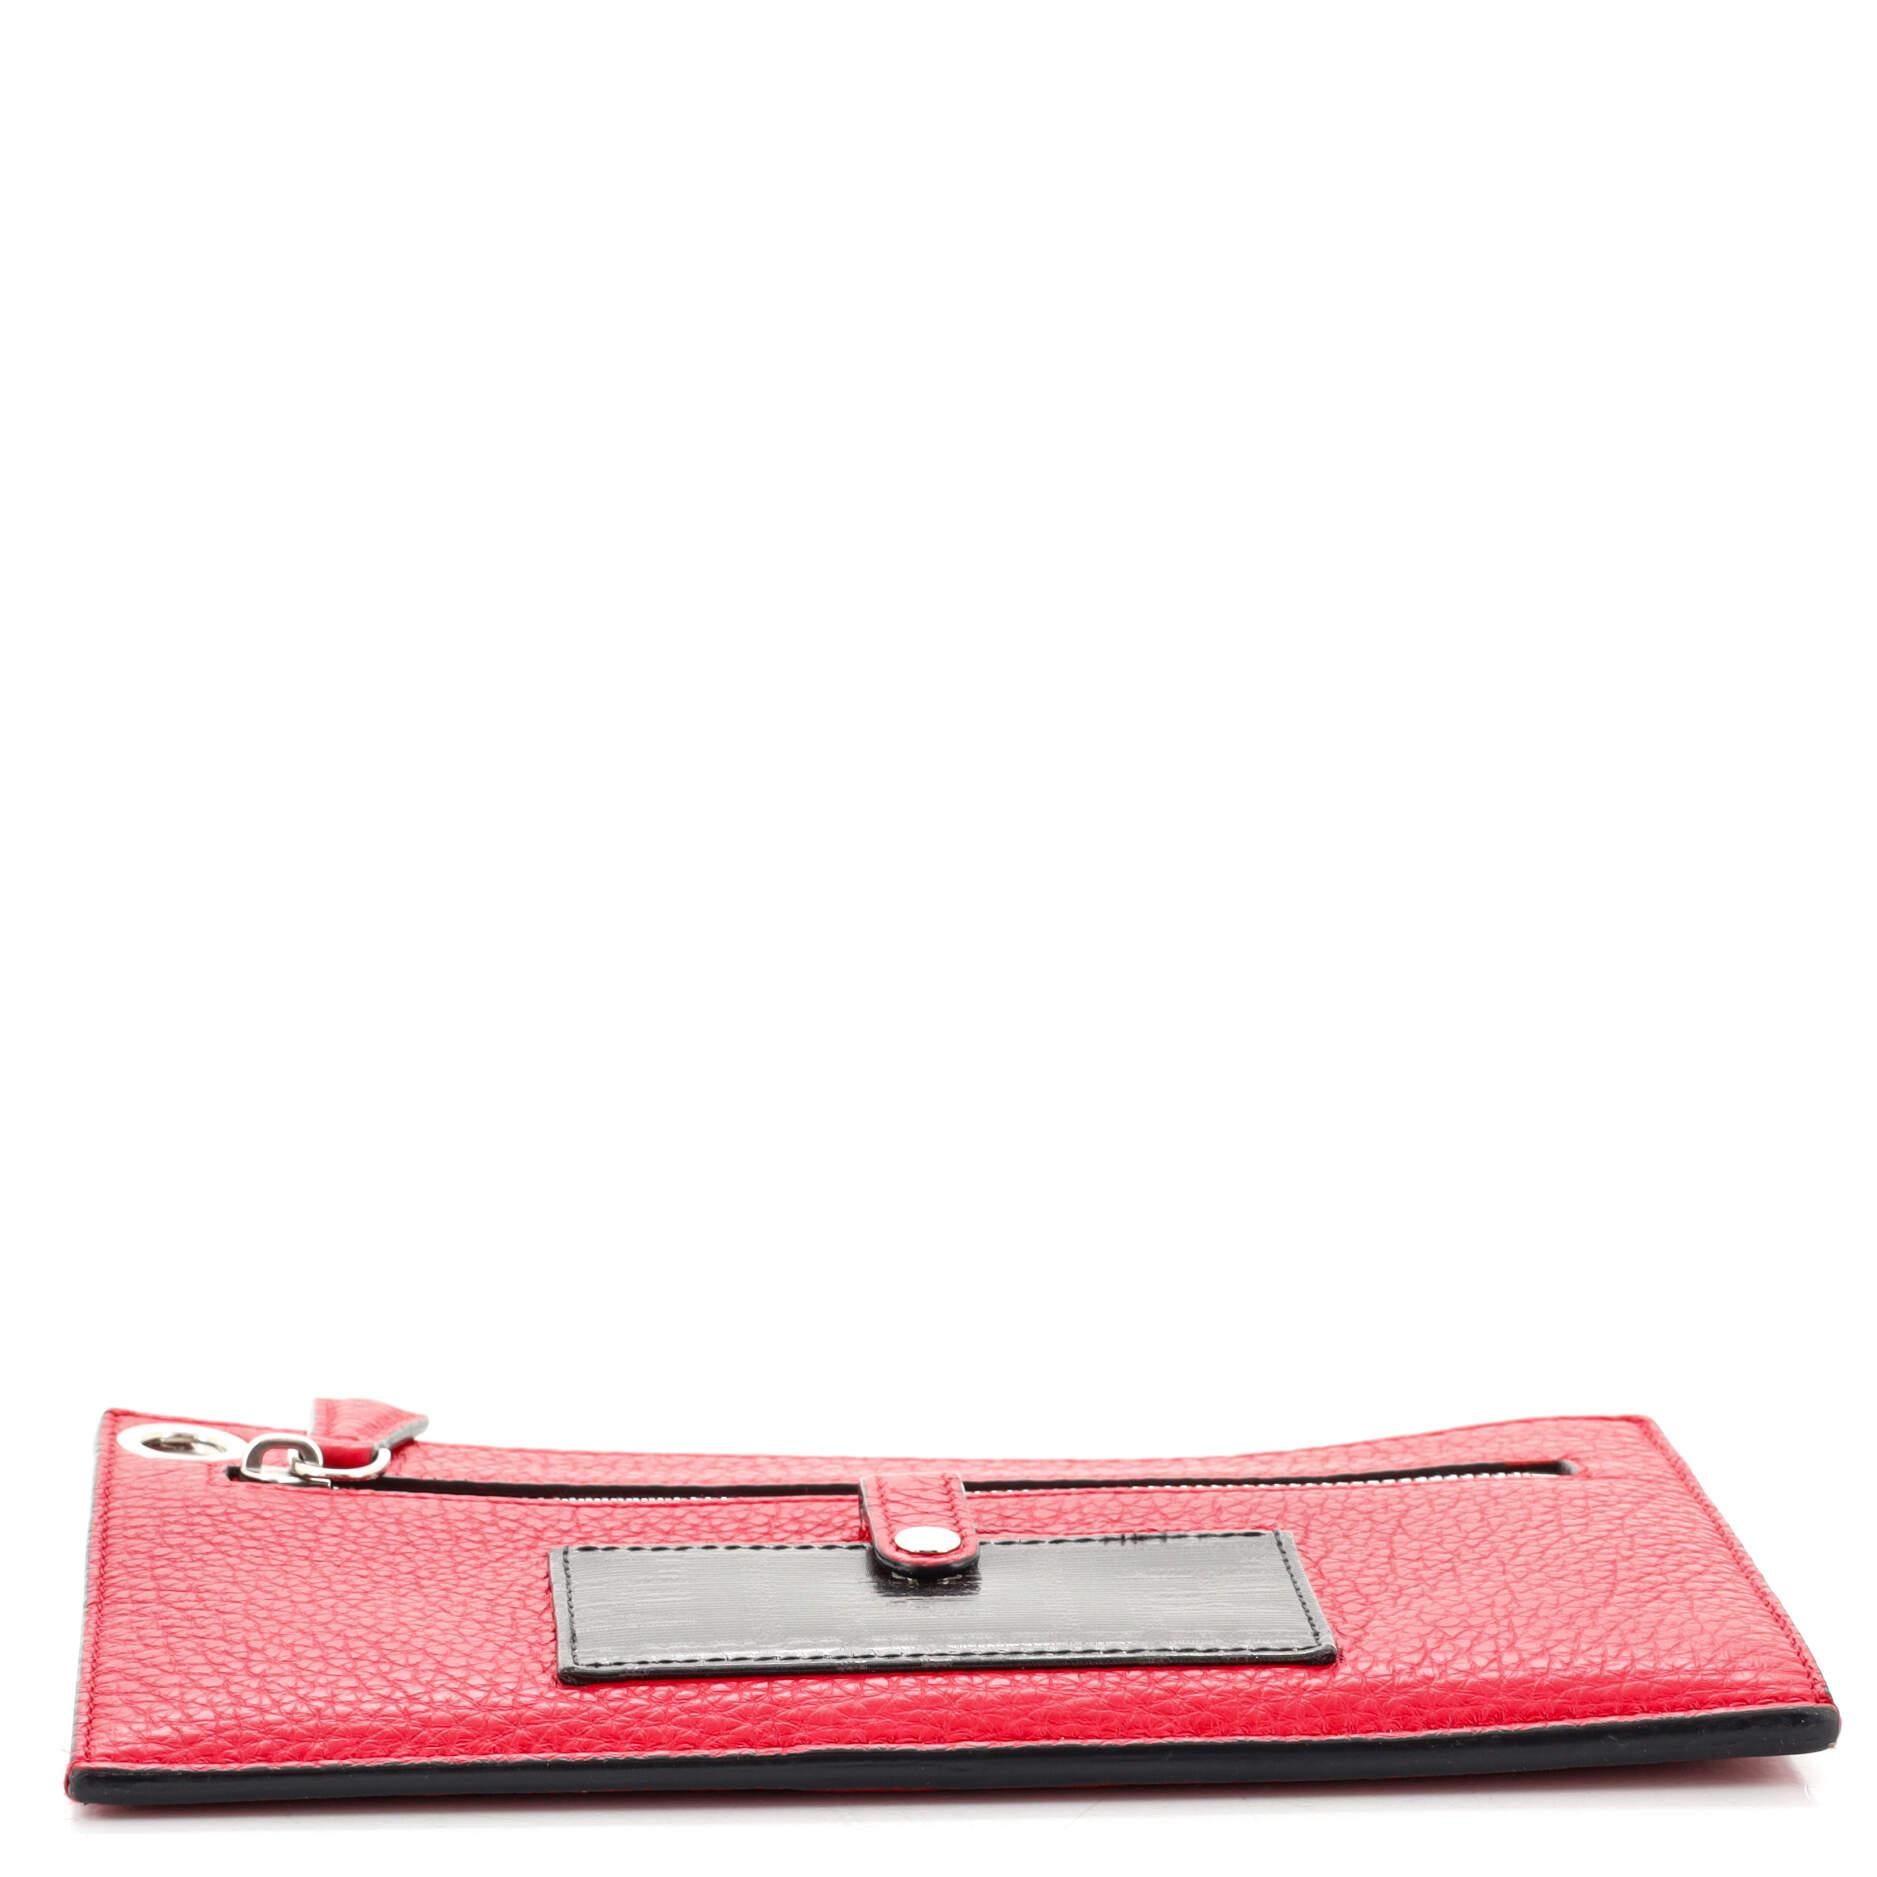 Red Fendi Selleria Wallet Pouch on Strap Leather